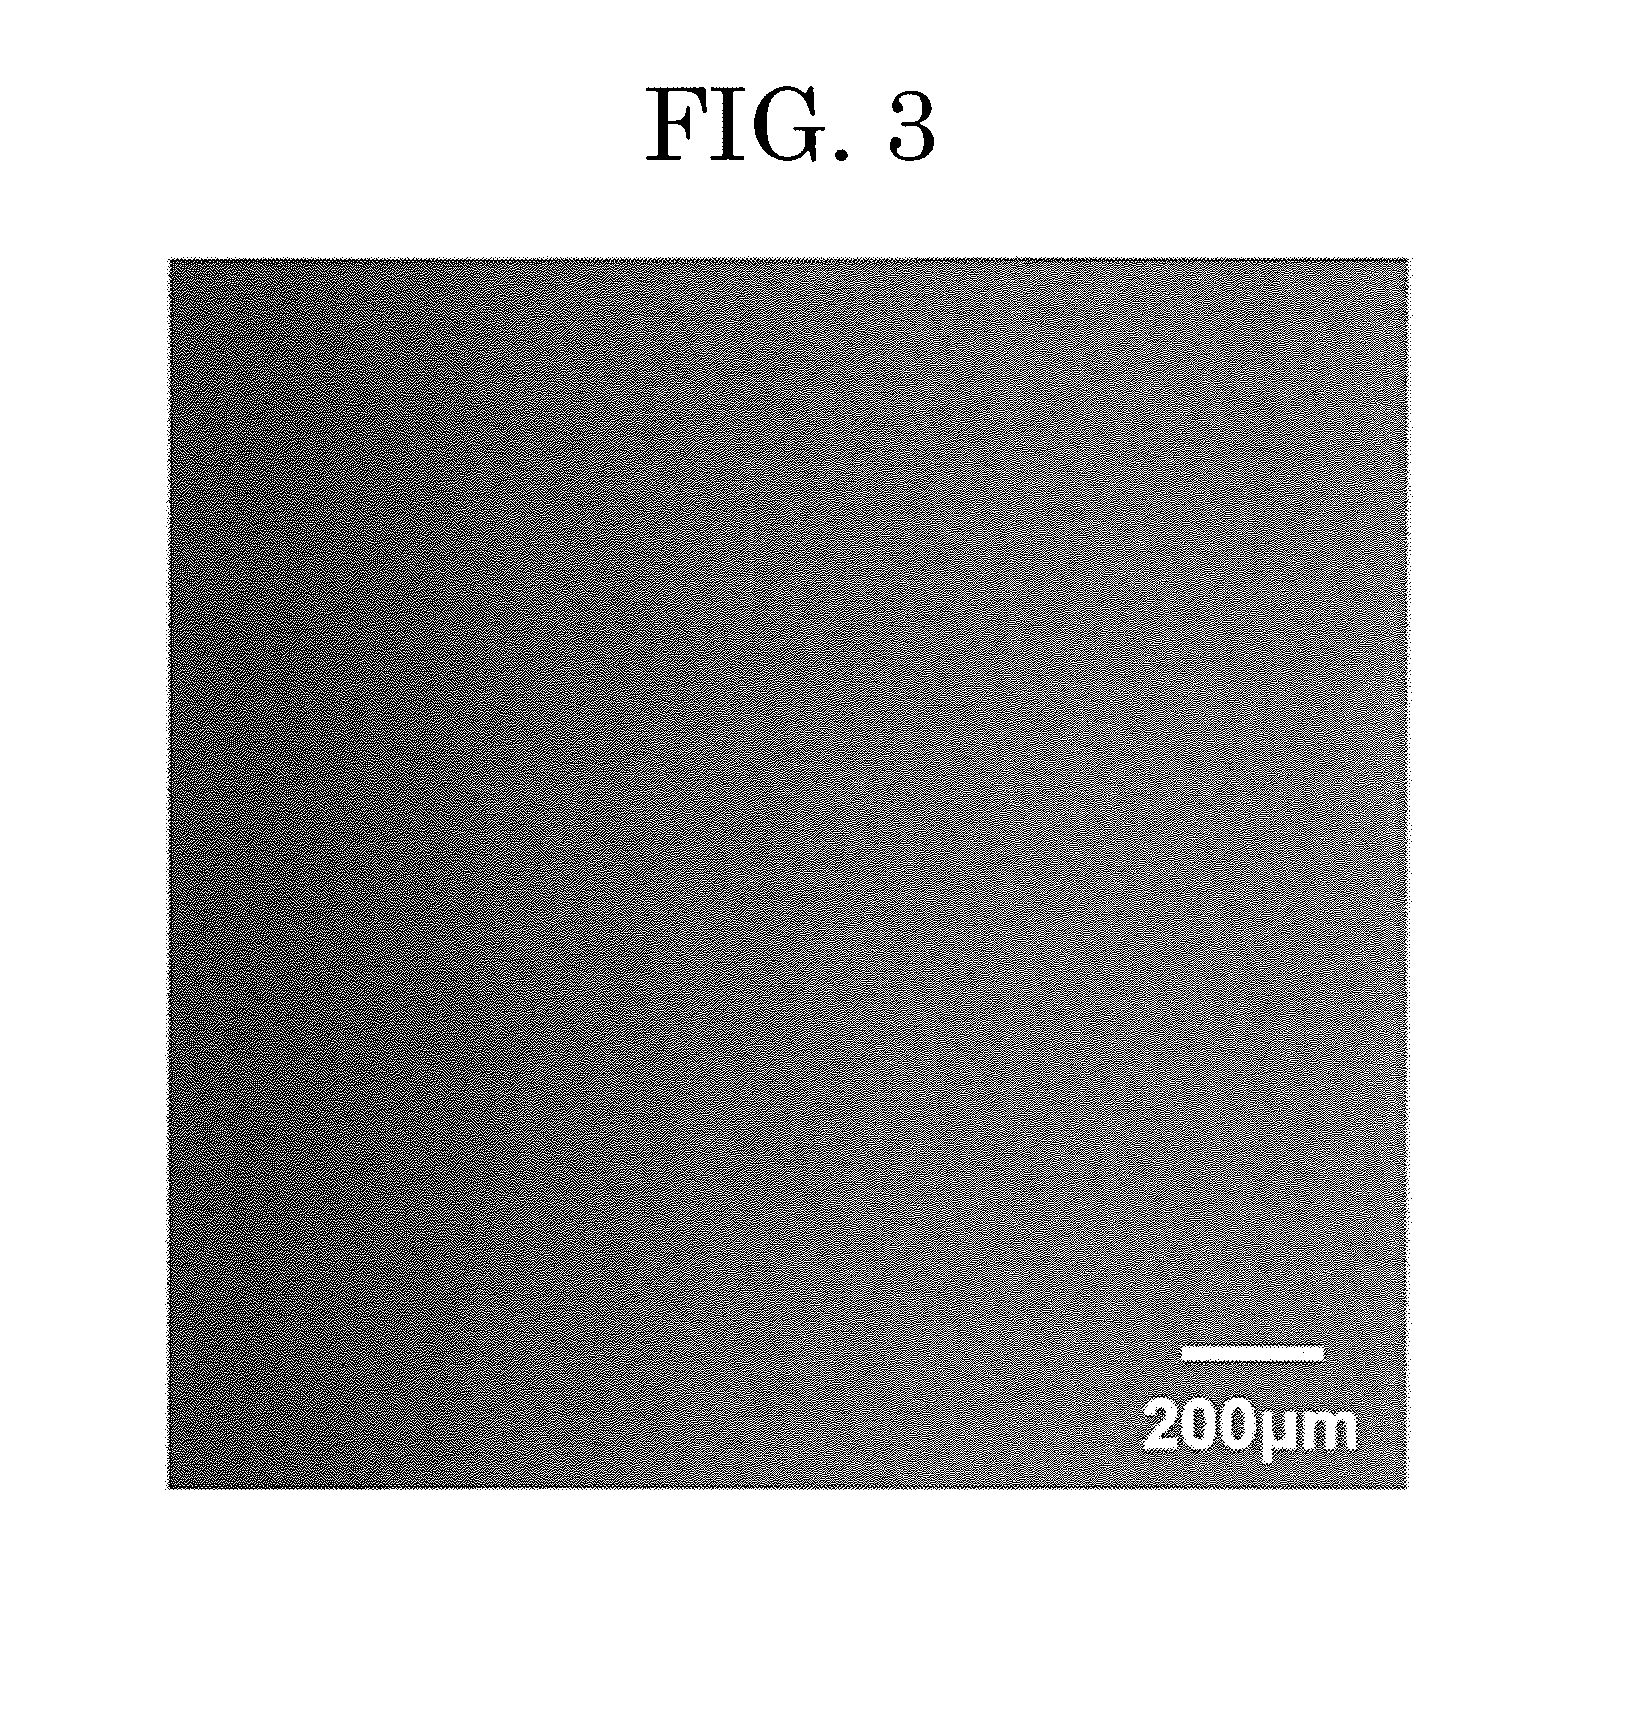 Silicon Carbide Epitaxial Wafer, Method for Manufacturing Silicon Carbide Epitaxial Wafer, Device for Manufacturing Silicon Carbide Epitaxial Wafer, and Silicon Carbide Semiconductor Element